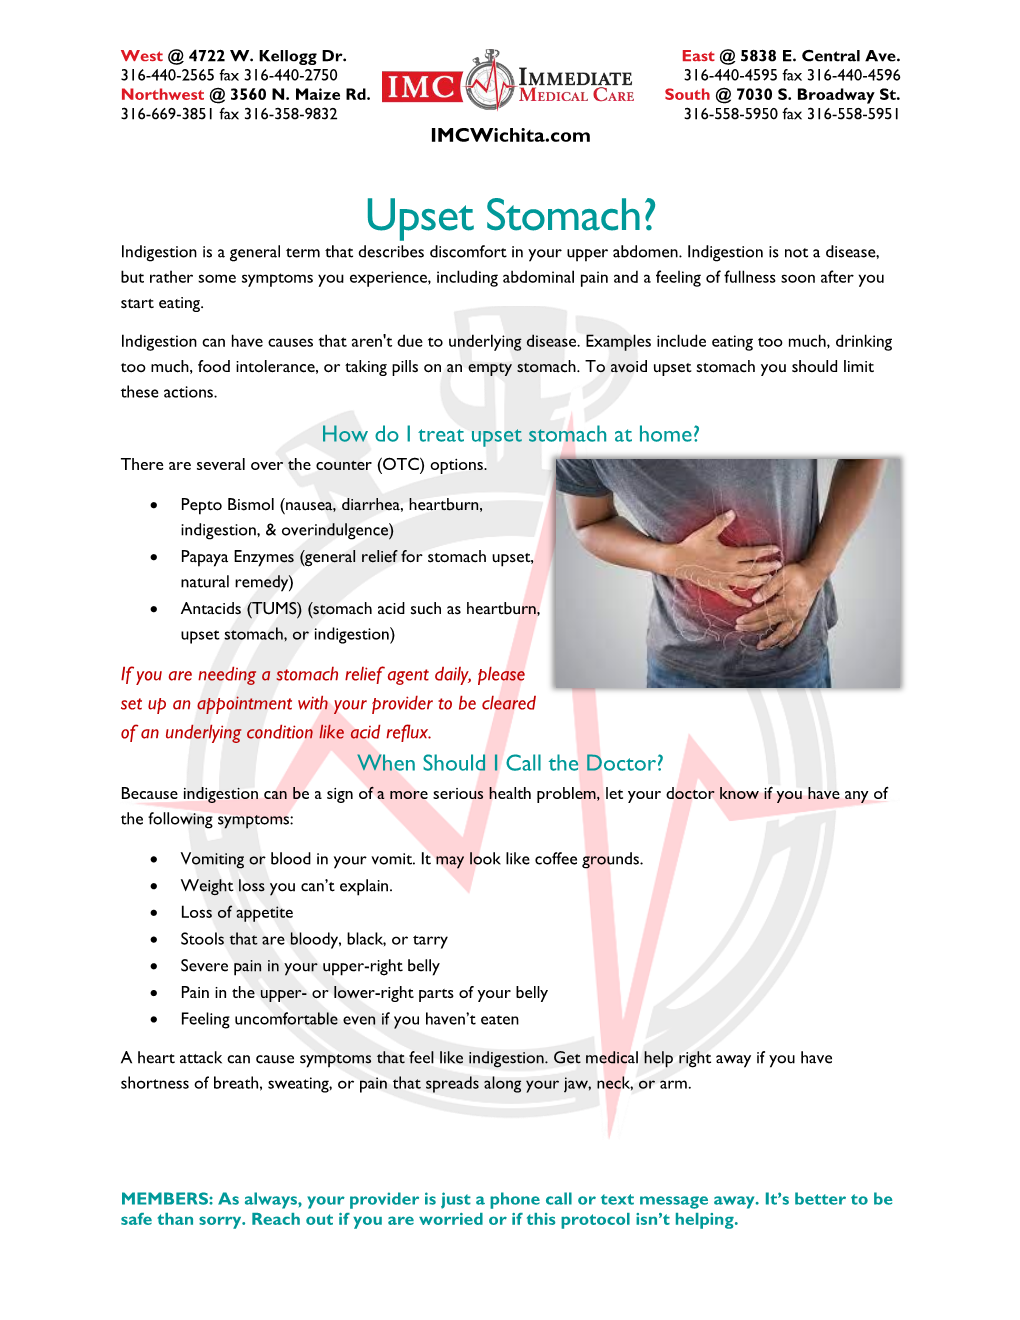 Upset Stomach? Indigestion Is a General Term That Describes Discomfort in Your Upper Abdomen